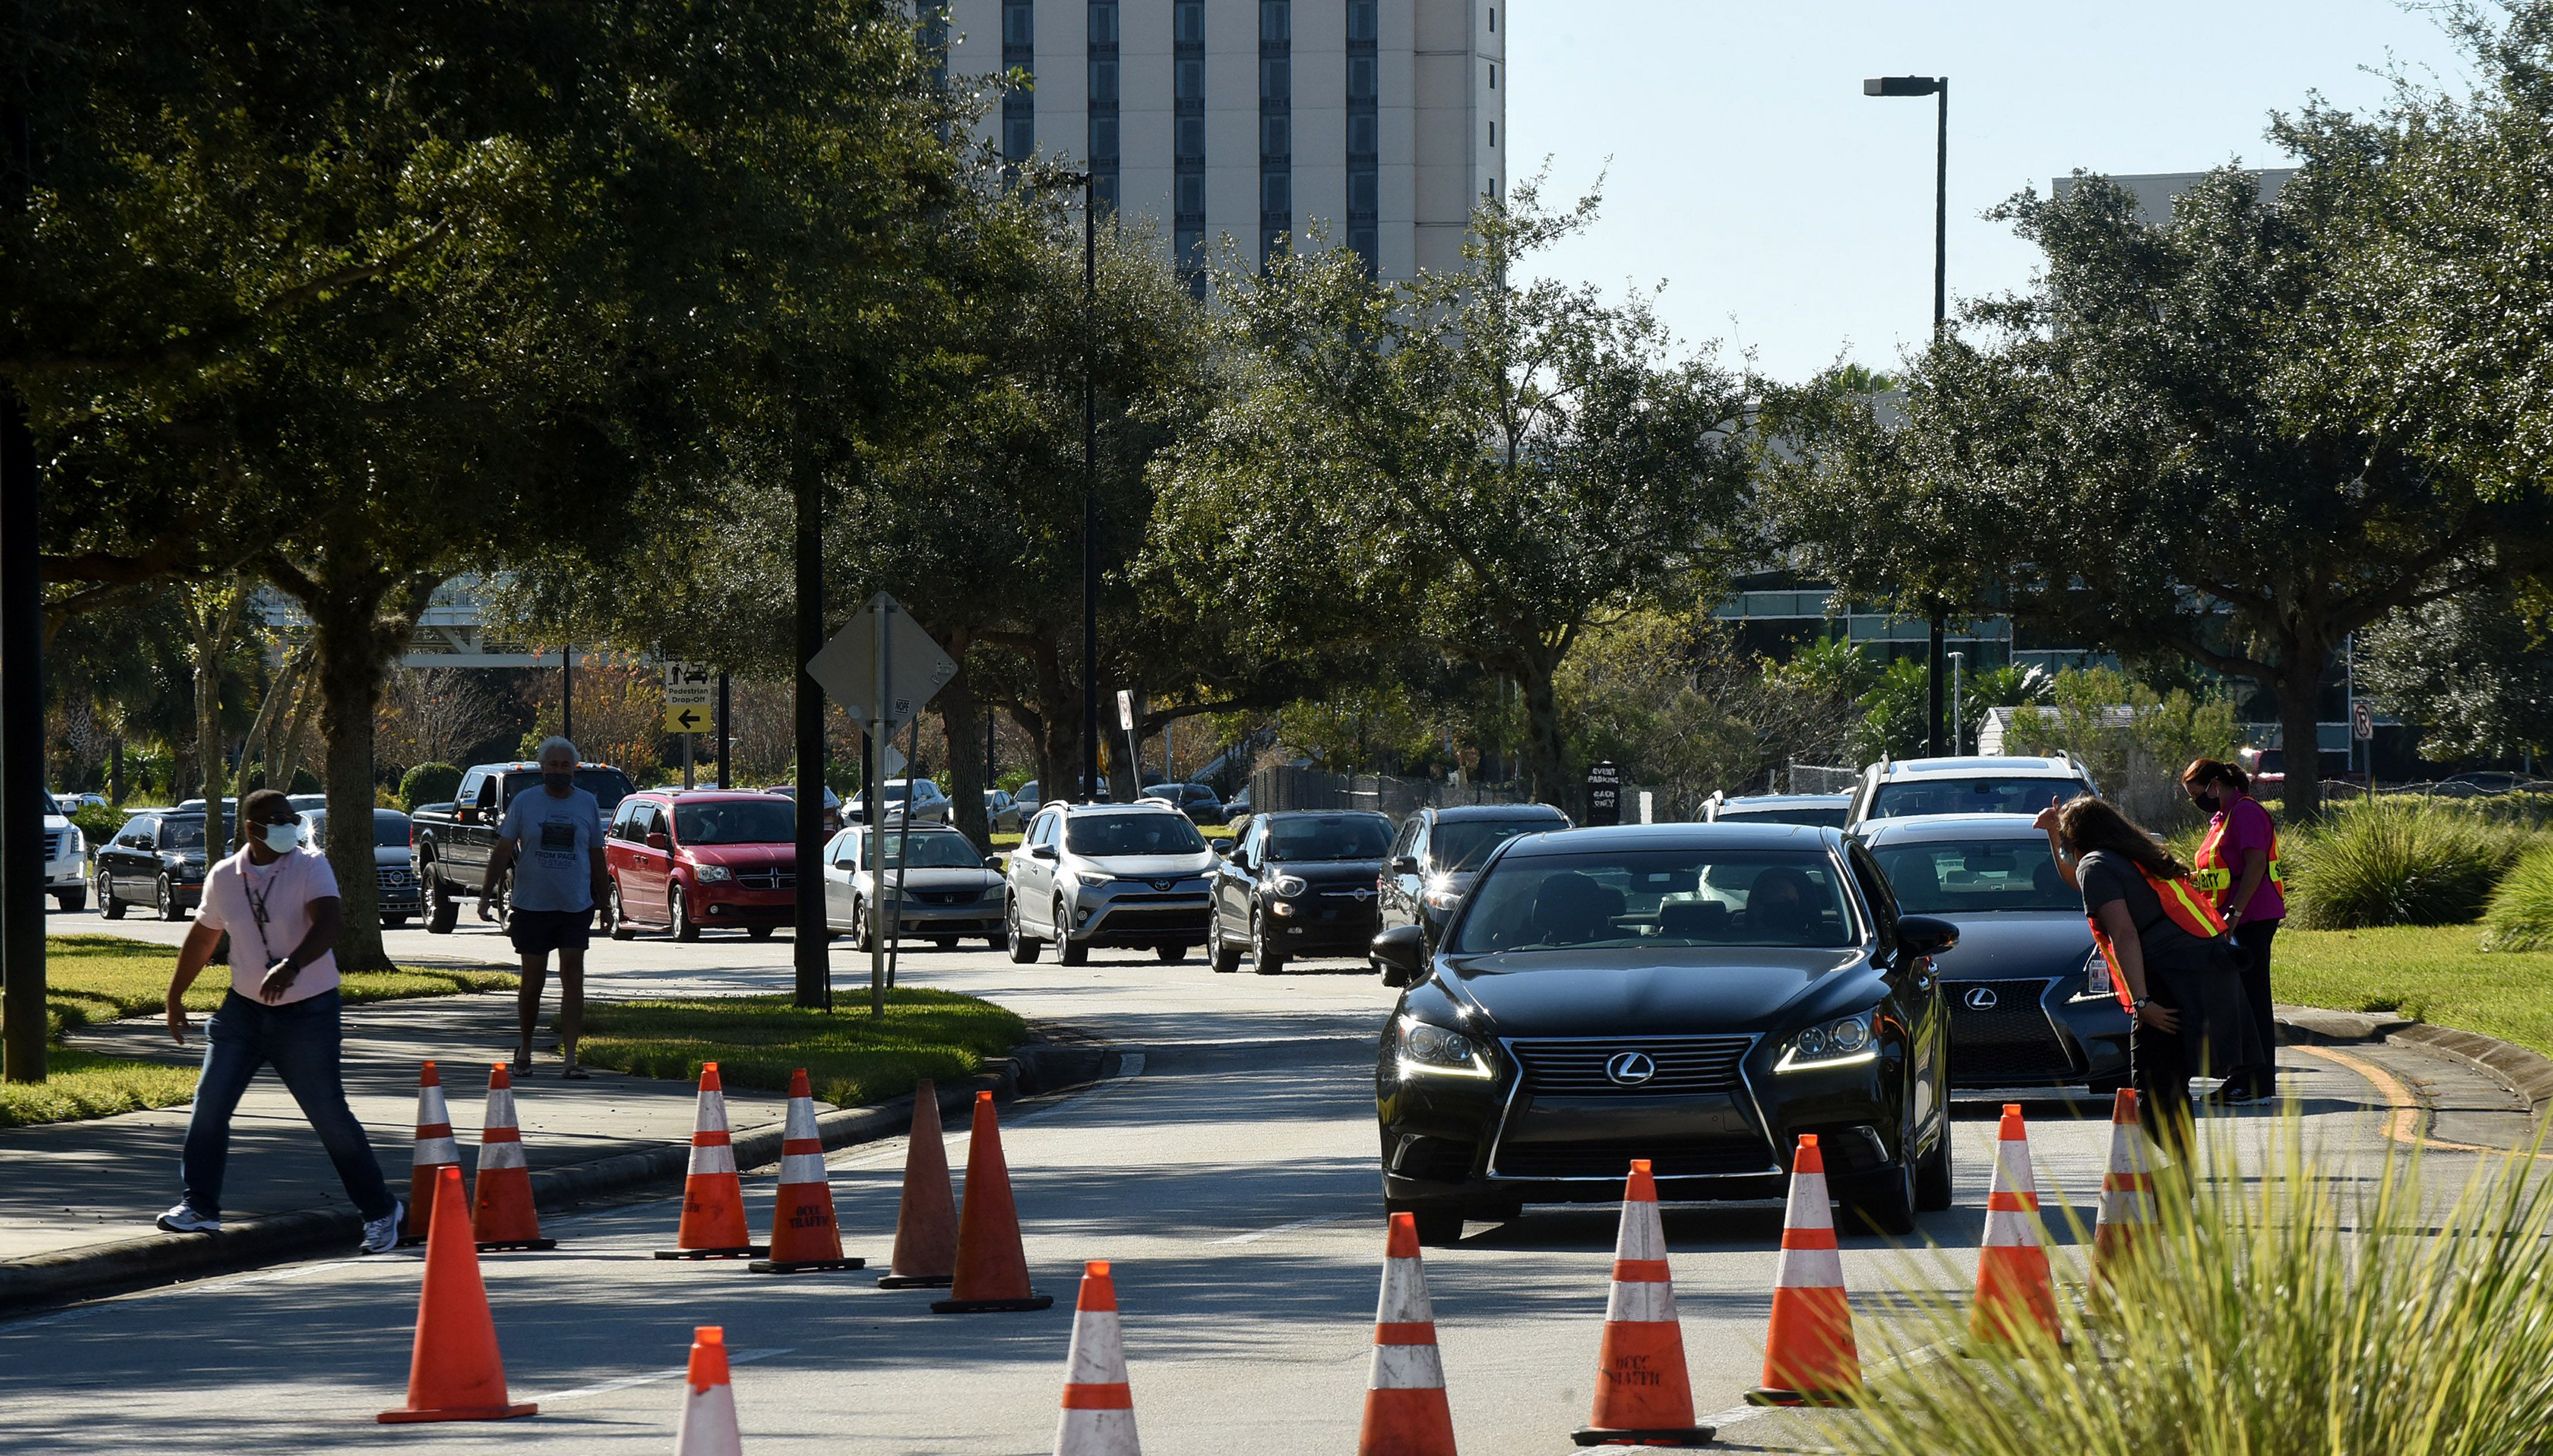 People arrive to receive the Moderna COVID-19 vaccine at a drive through site at the Orange County Convention Center in Orlando, Florida. Photo: Paul Hennessy/NurPhoto via Getty Images 